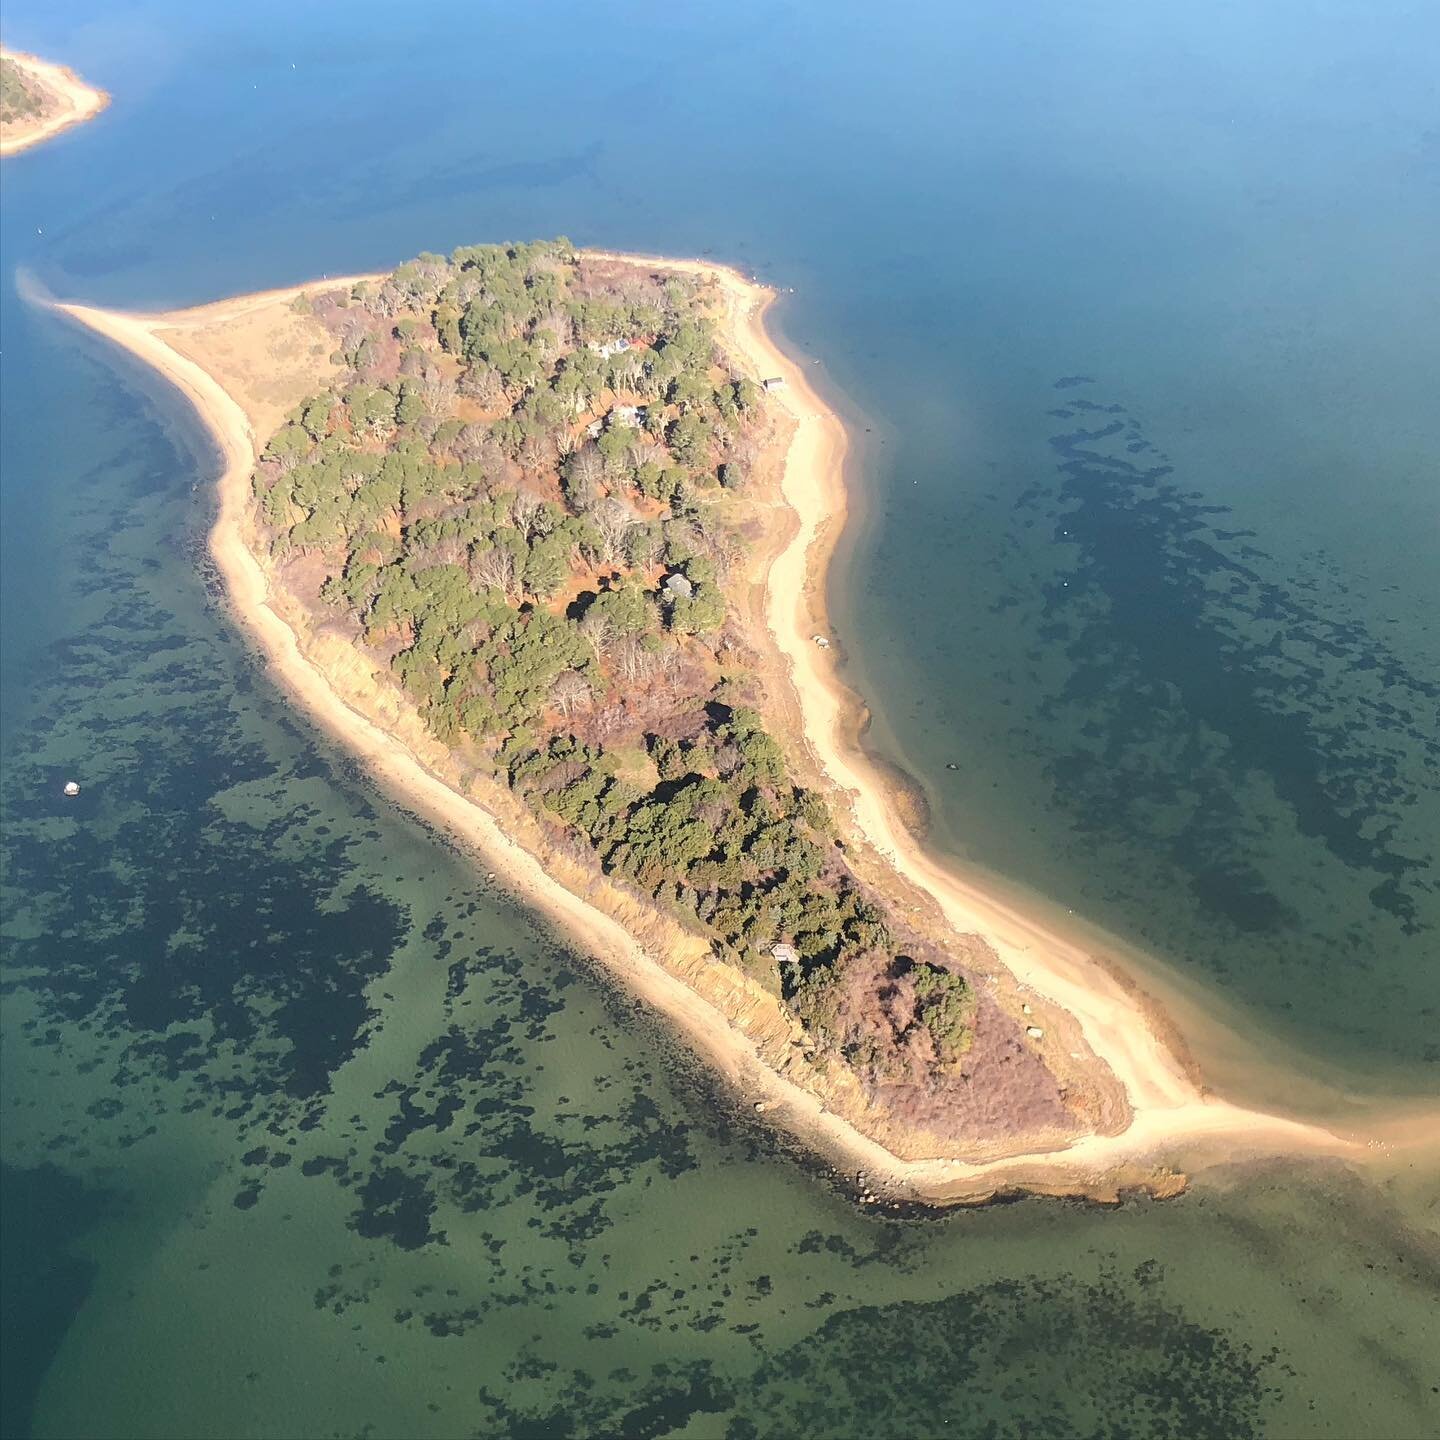 Another view of the island from last week&rsquo;s overflight.

#aerialphotography 
#ecosystem
#eelgrass 
#marinescience
#conservation 
#landconservation